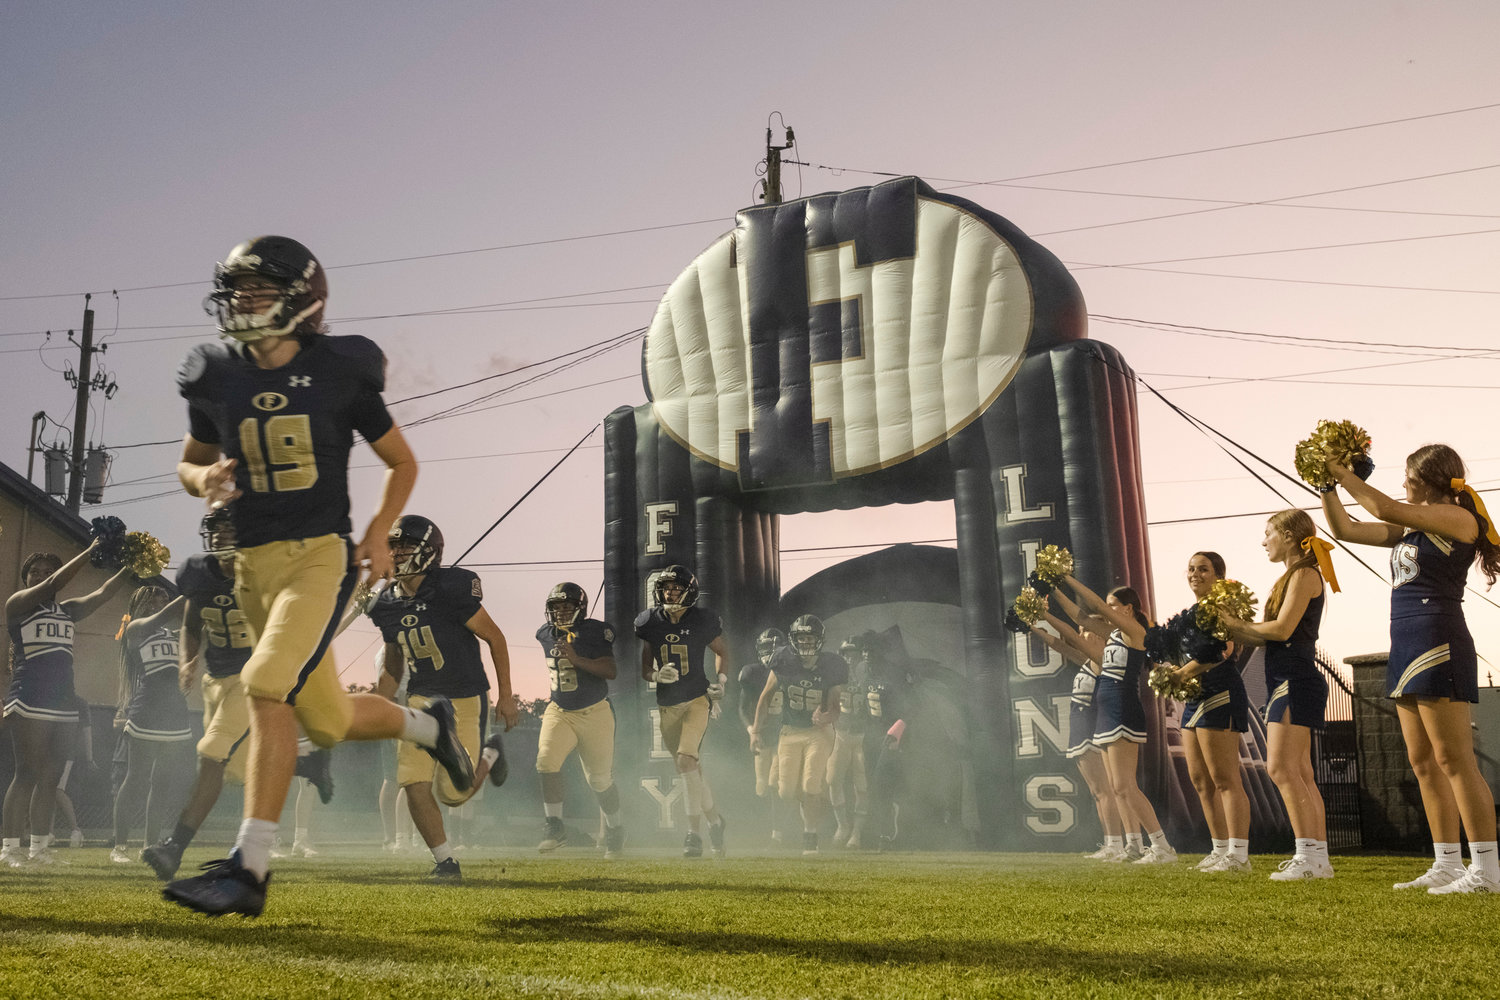 The Foley Lions take the field for their non-region contest against the Saraland Spartans at Ivan Jones Stadium Sept. 23. Foley hosts Daphne this Friday with the Class 7A Region 1 regular season title on the line.